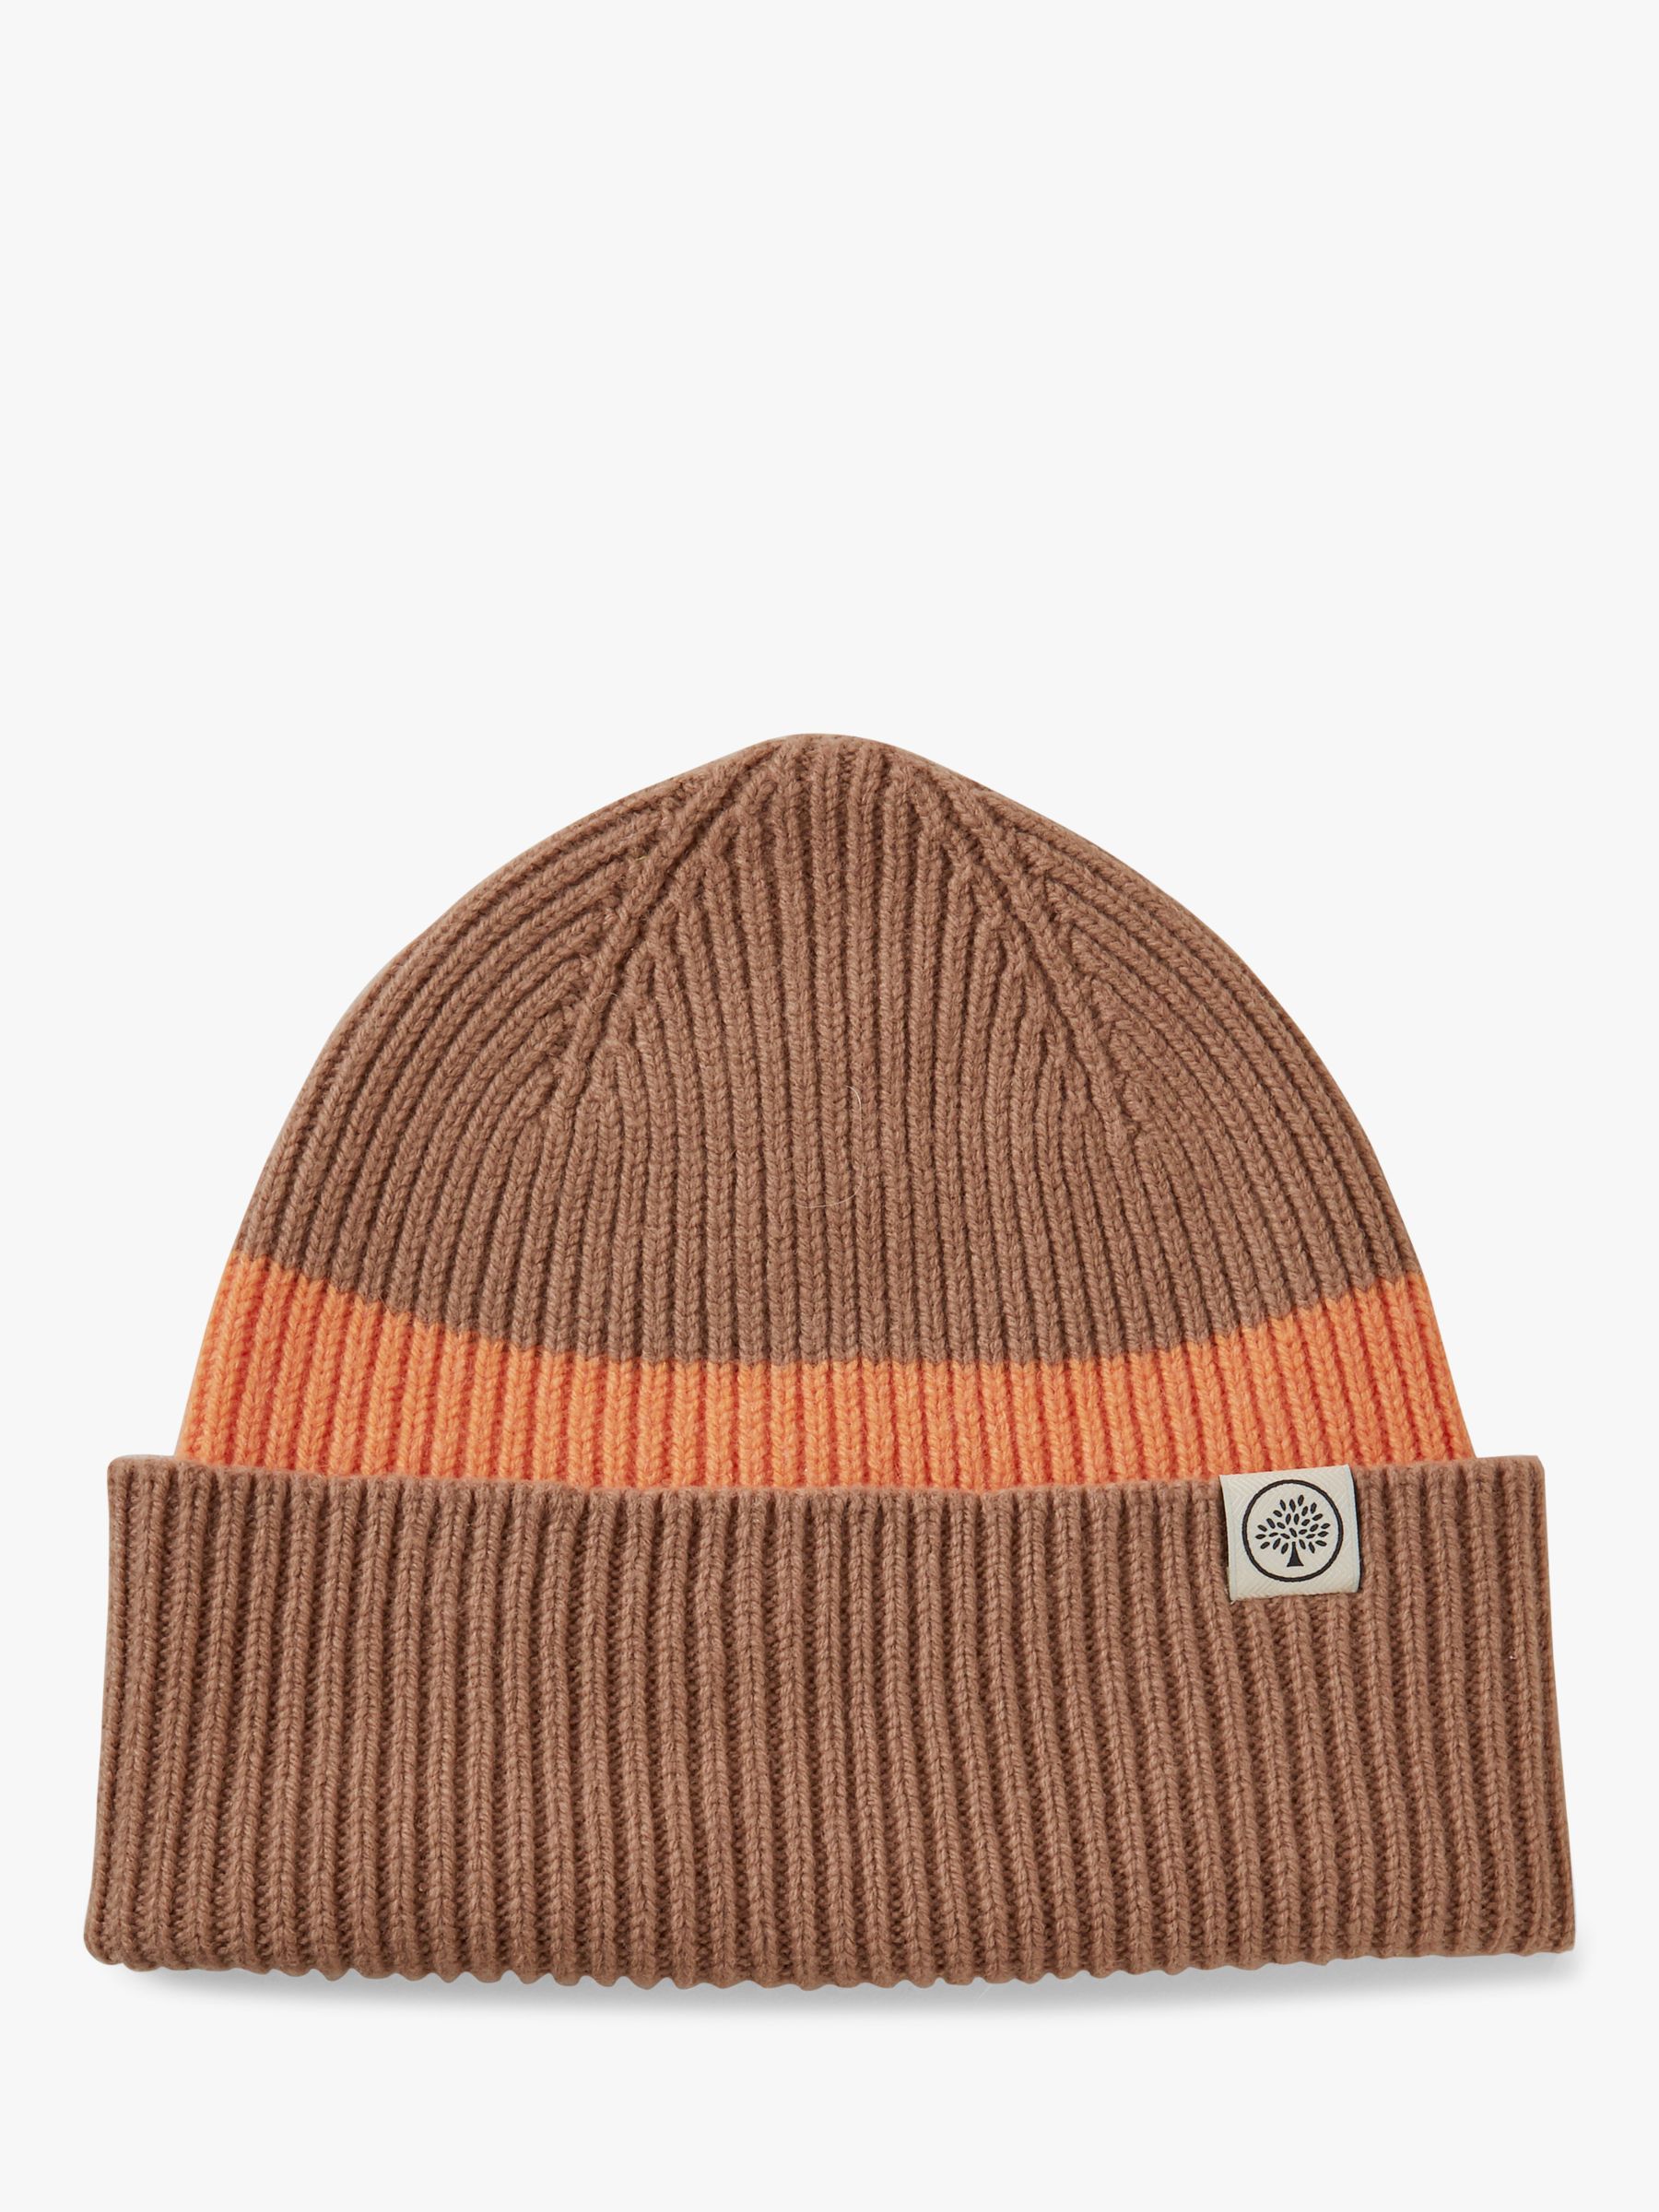 Mulberry Colour Block Cashmere-Blend Knitted Beanie Hat, Sable/Apricot ...